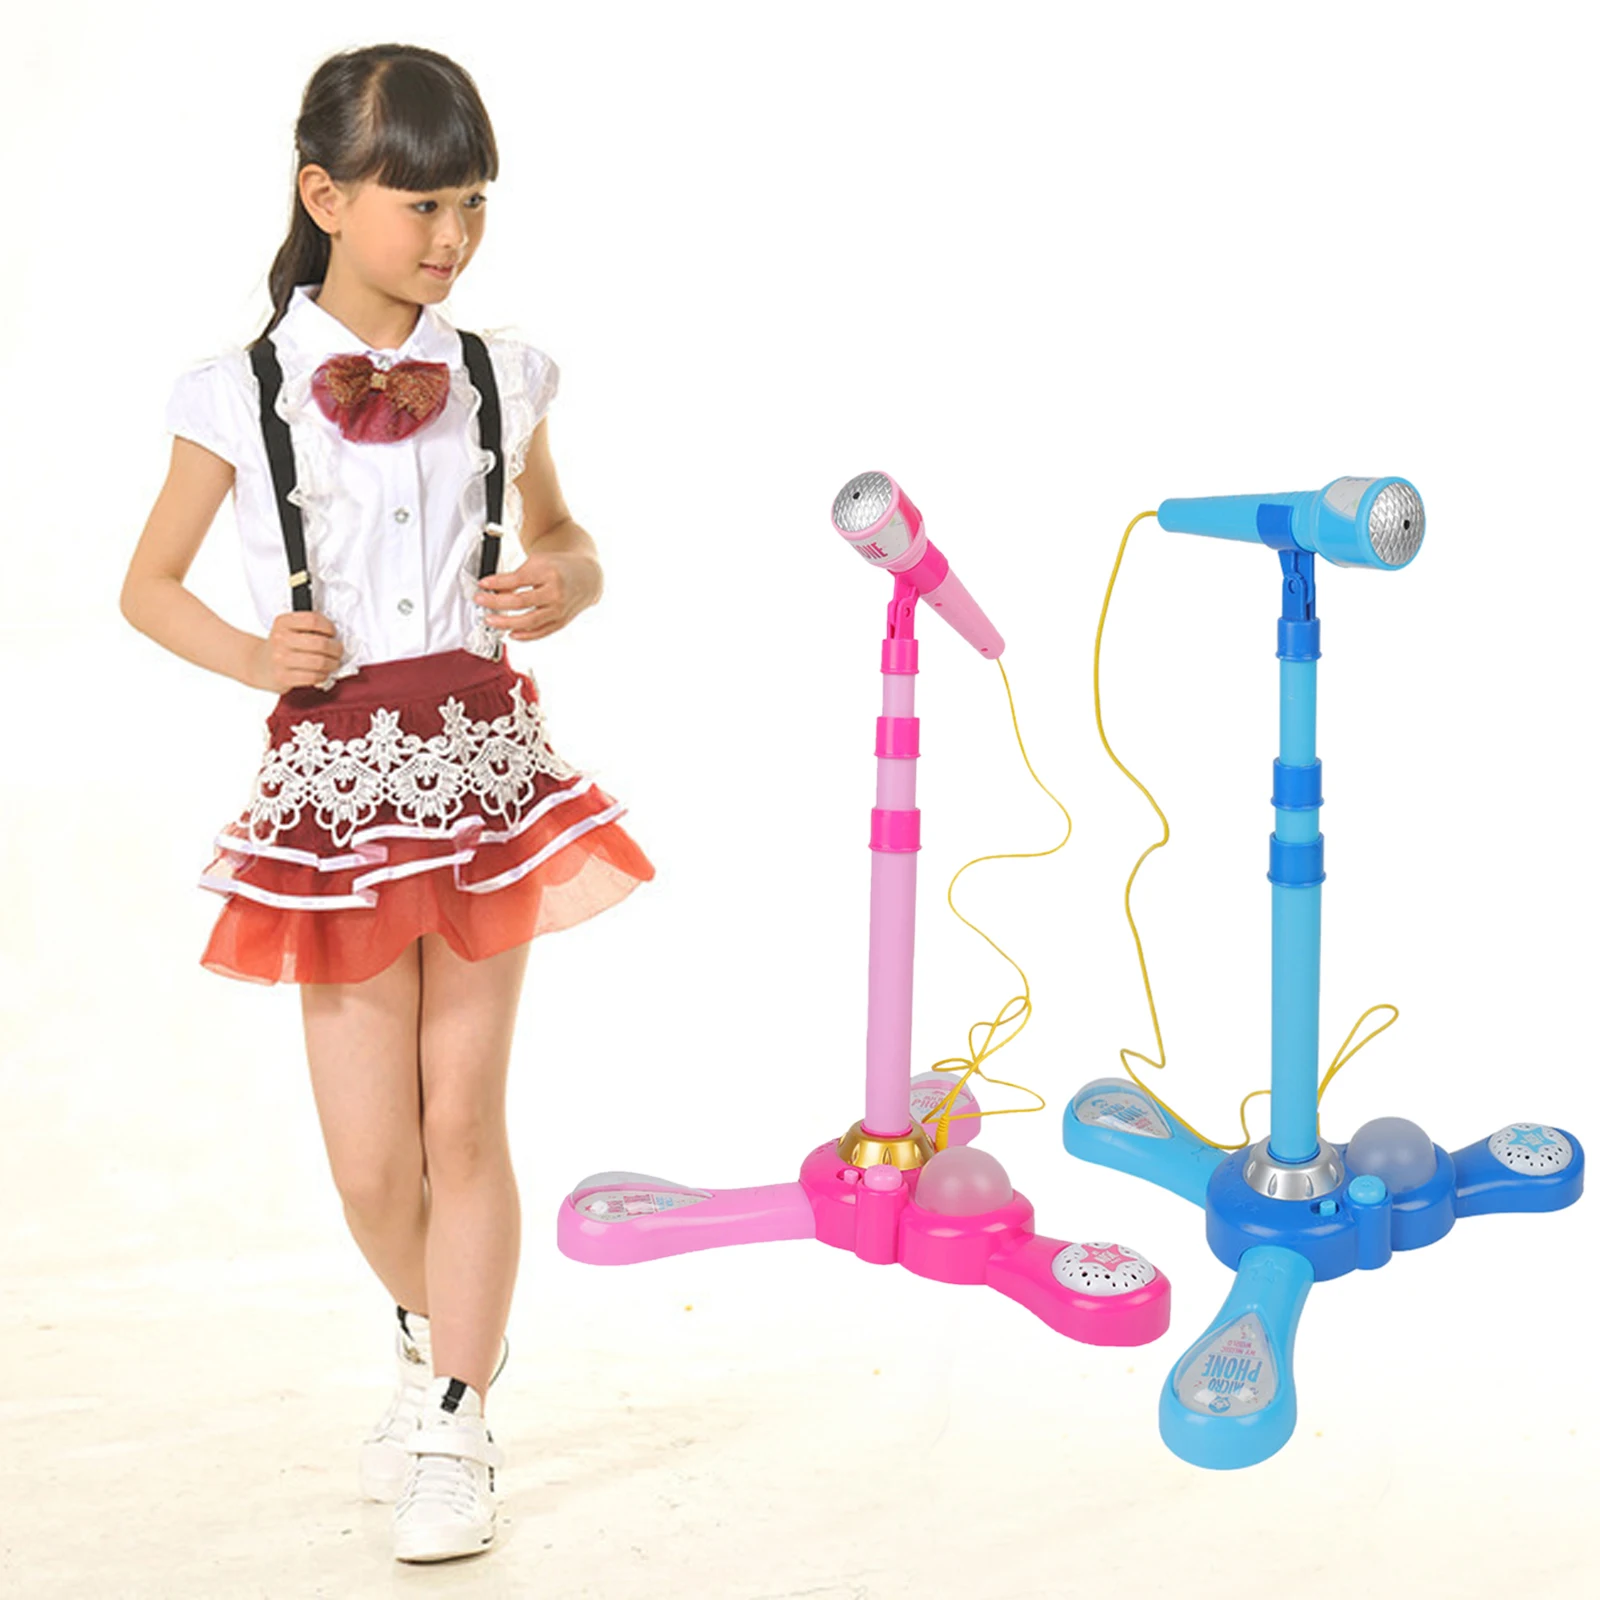 Adjustable Karaoke Machine Toy Microphone Set Singing Musical Portable Educational with Stand Connect to Mobile Phone